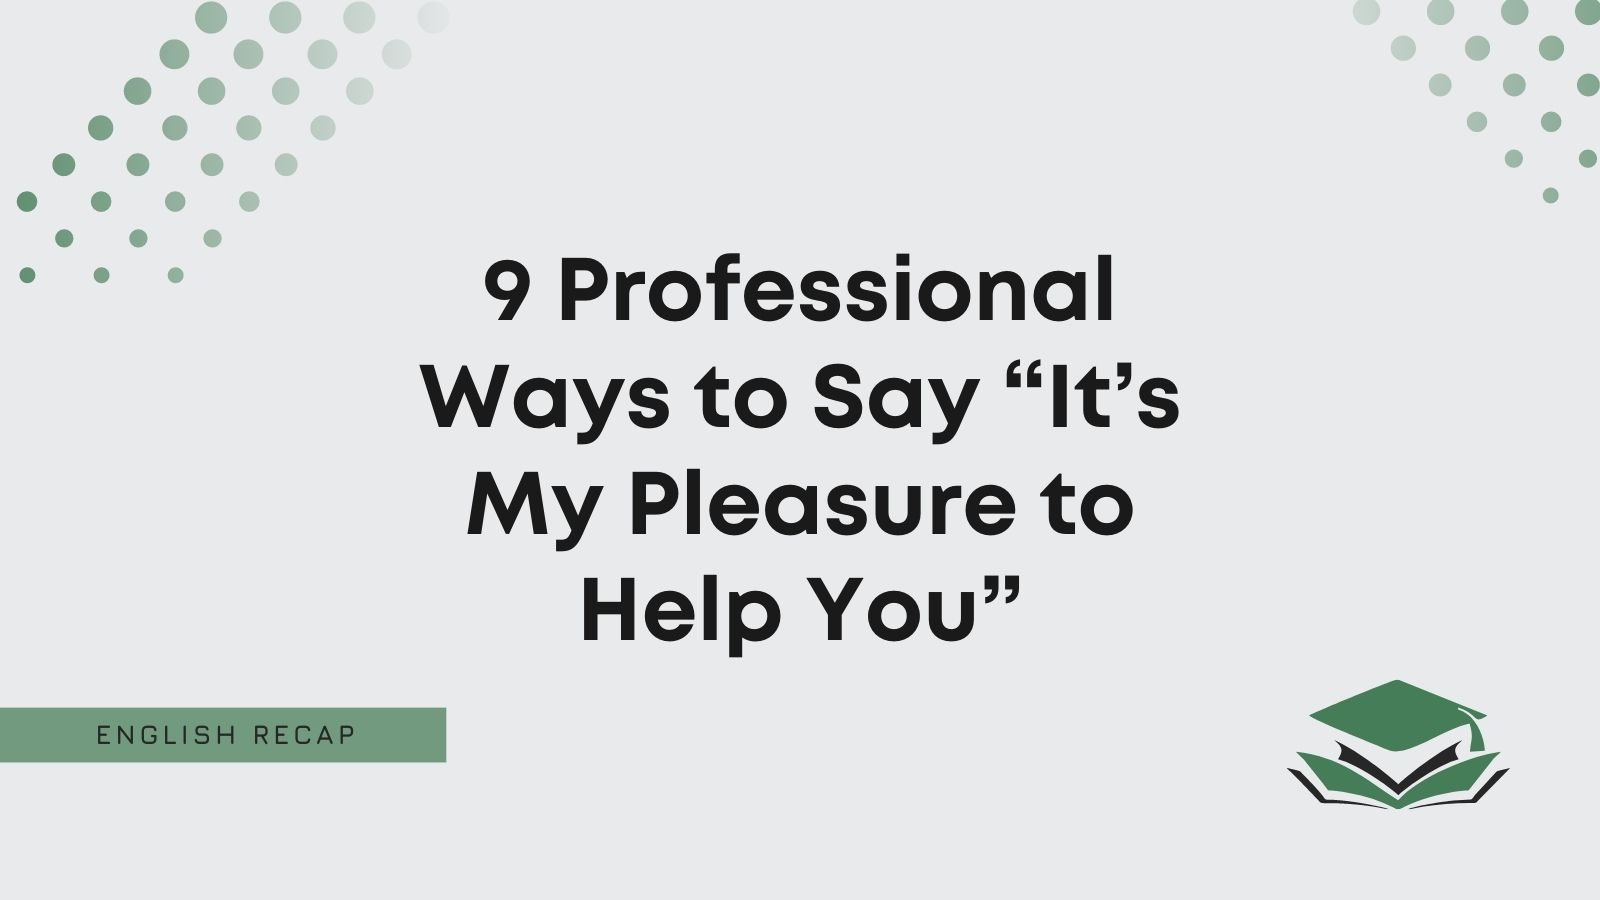 9 Professional Ways to Say “It's My Pleasure to Help You” - English Recap